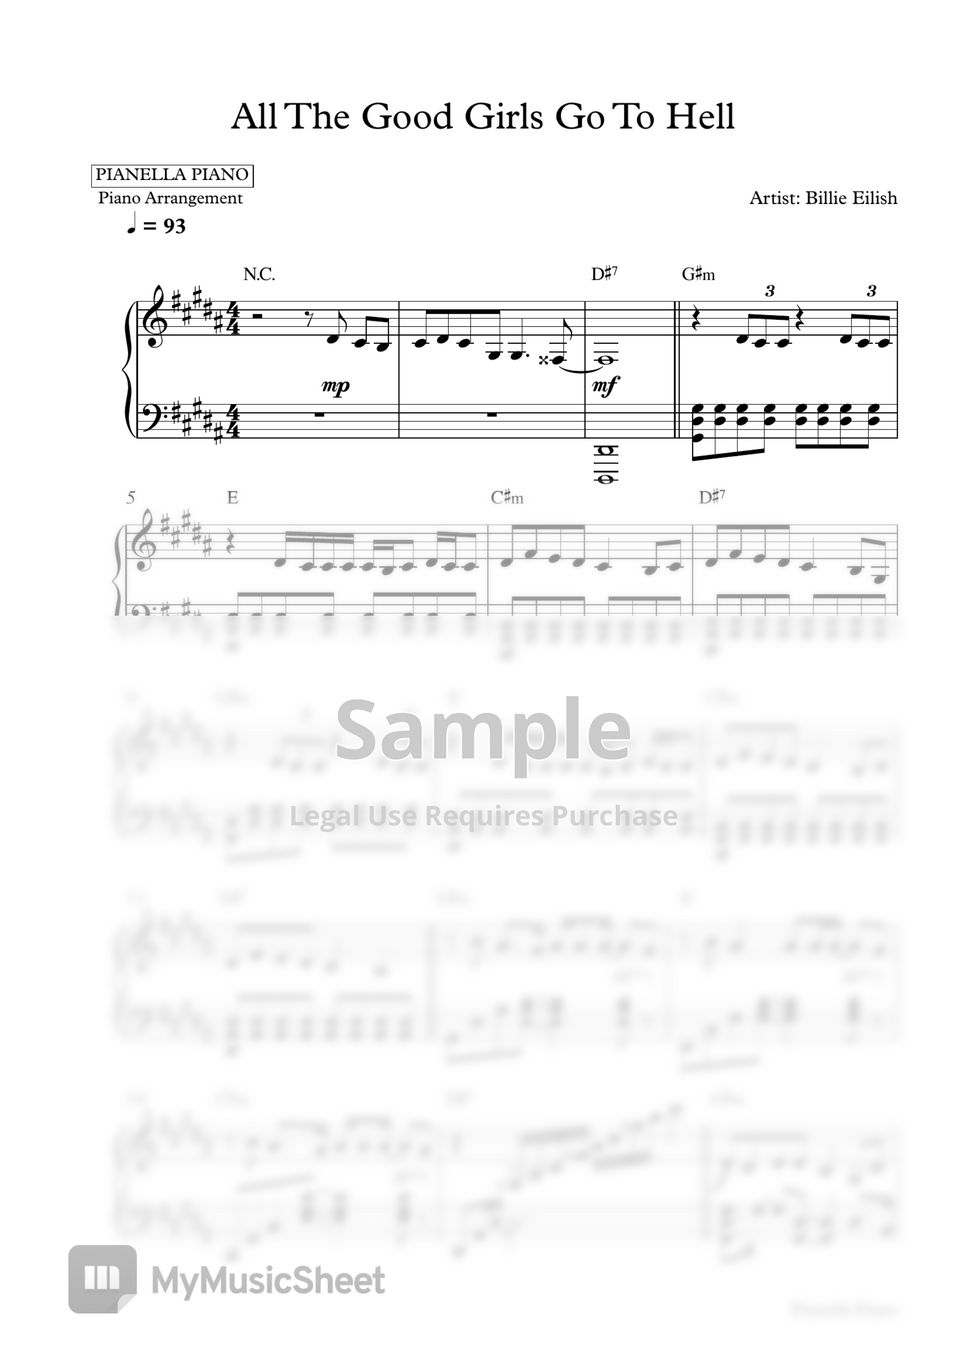 Billie Eilish - All The Good Girls Go To Hell (Piano Sheet) by Pianella Piano